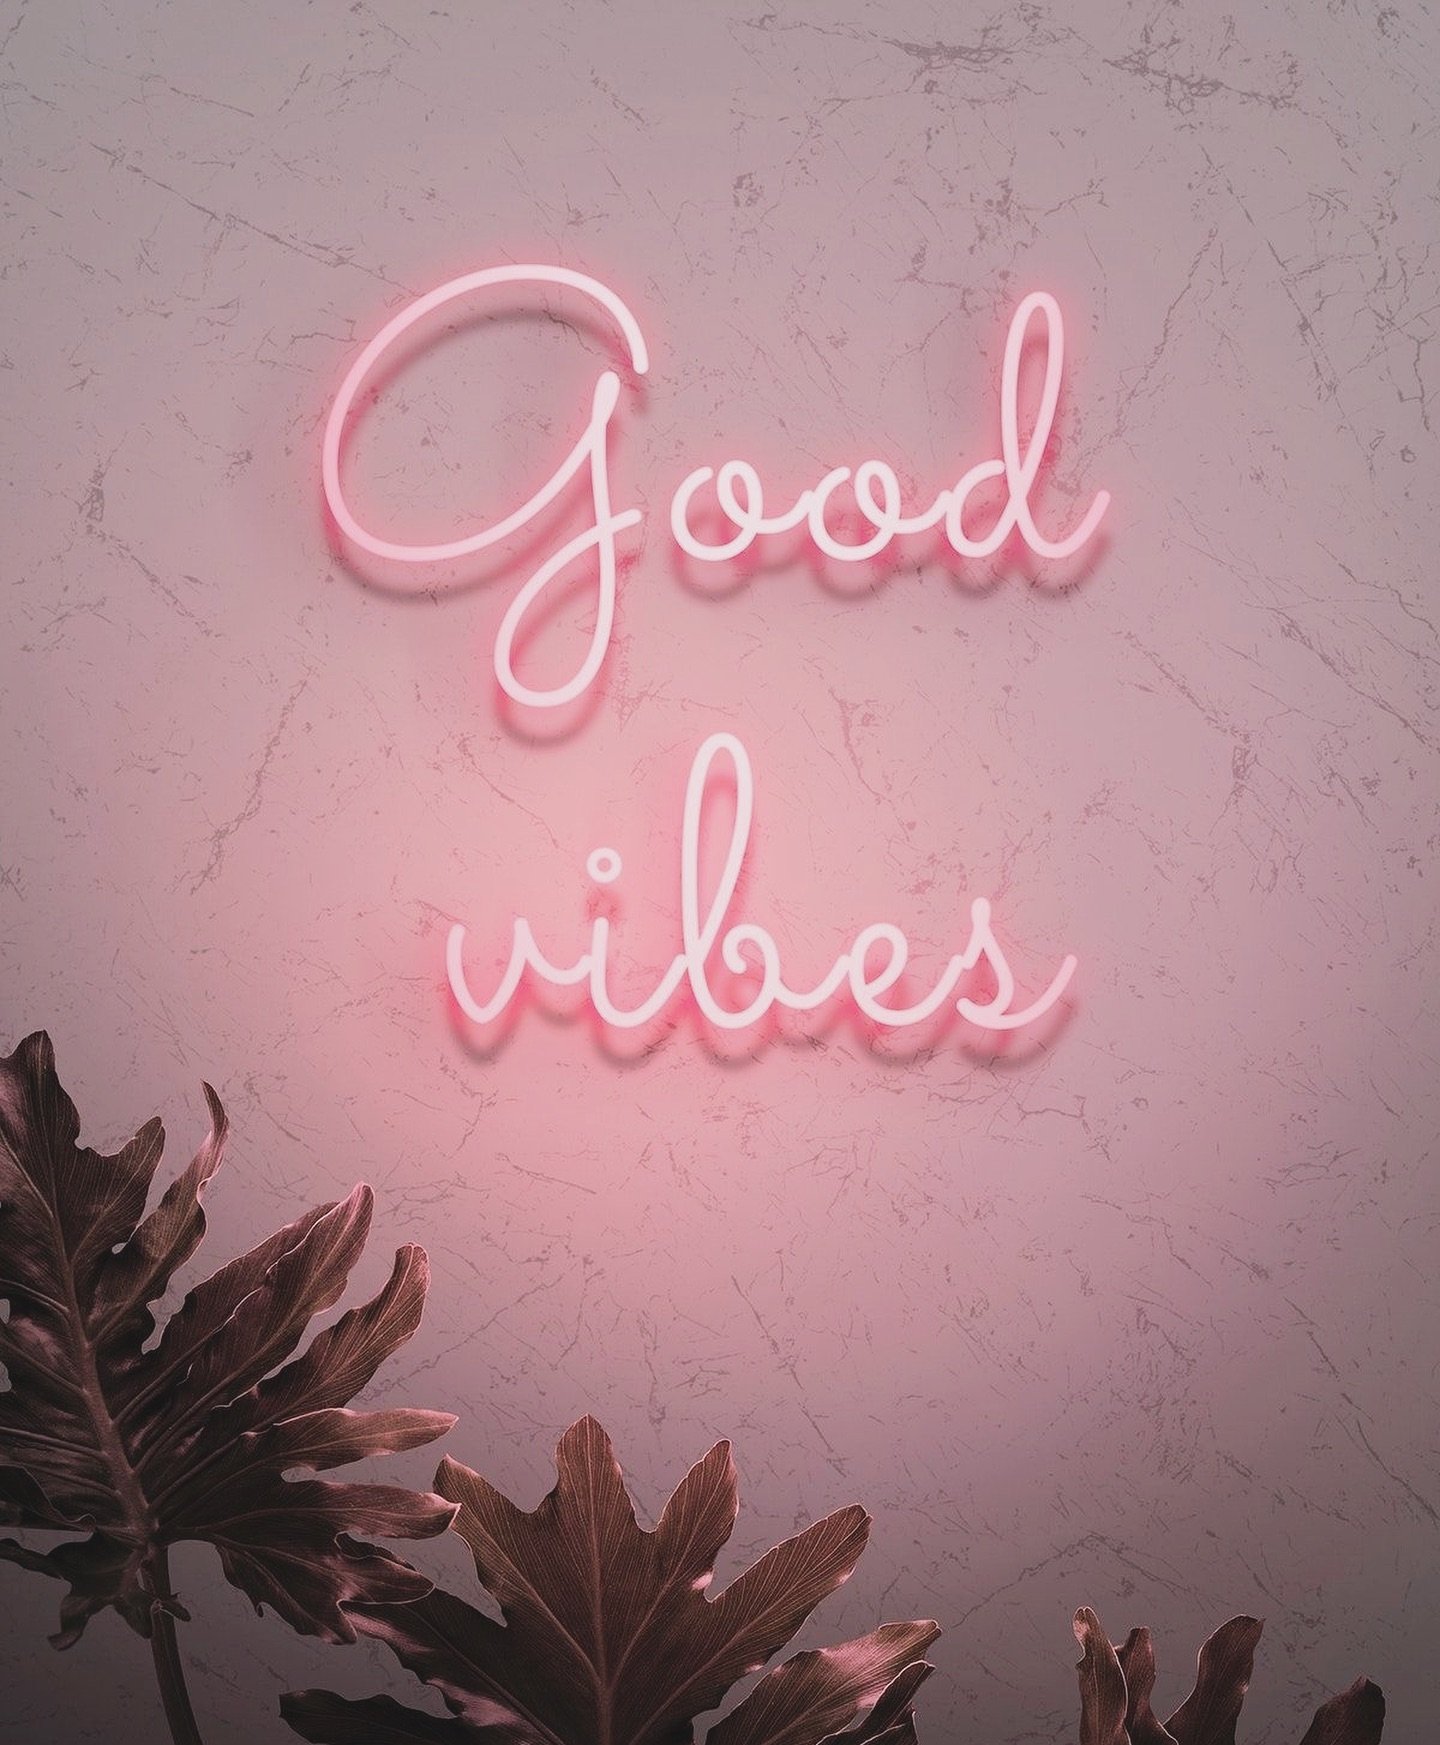 Good vibes only&nbsp;💗